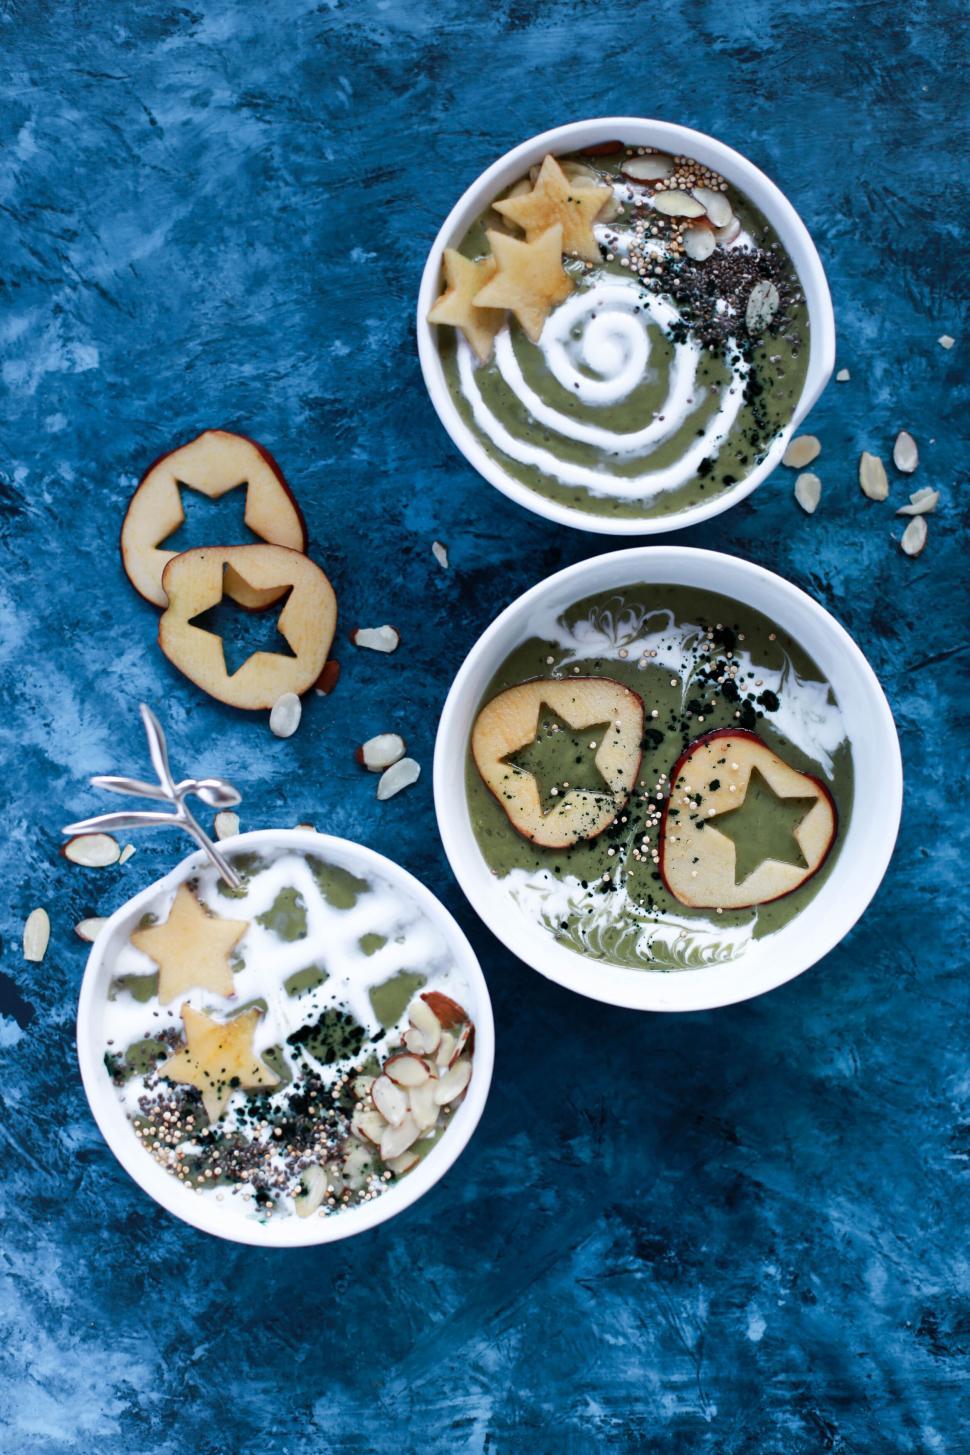 Free Image of Starry patterned holiday smoothie bowls 